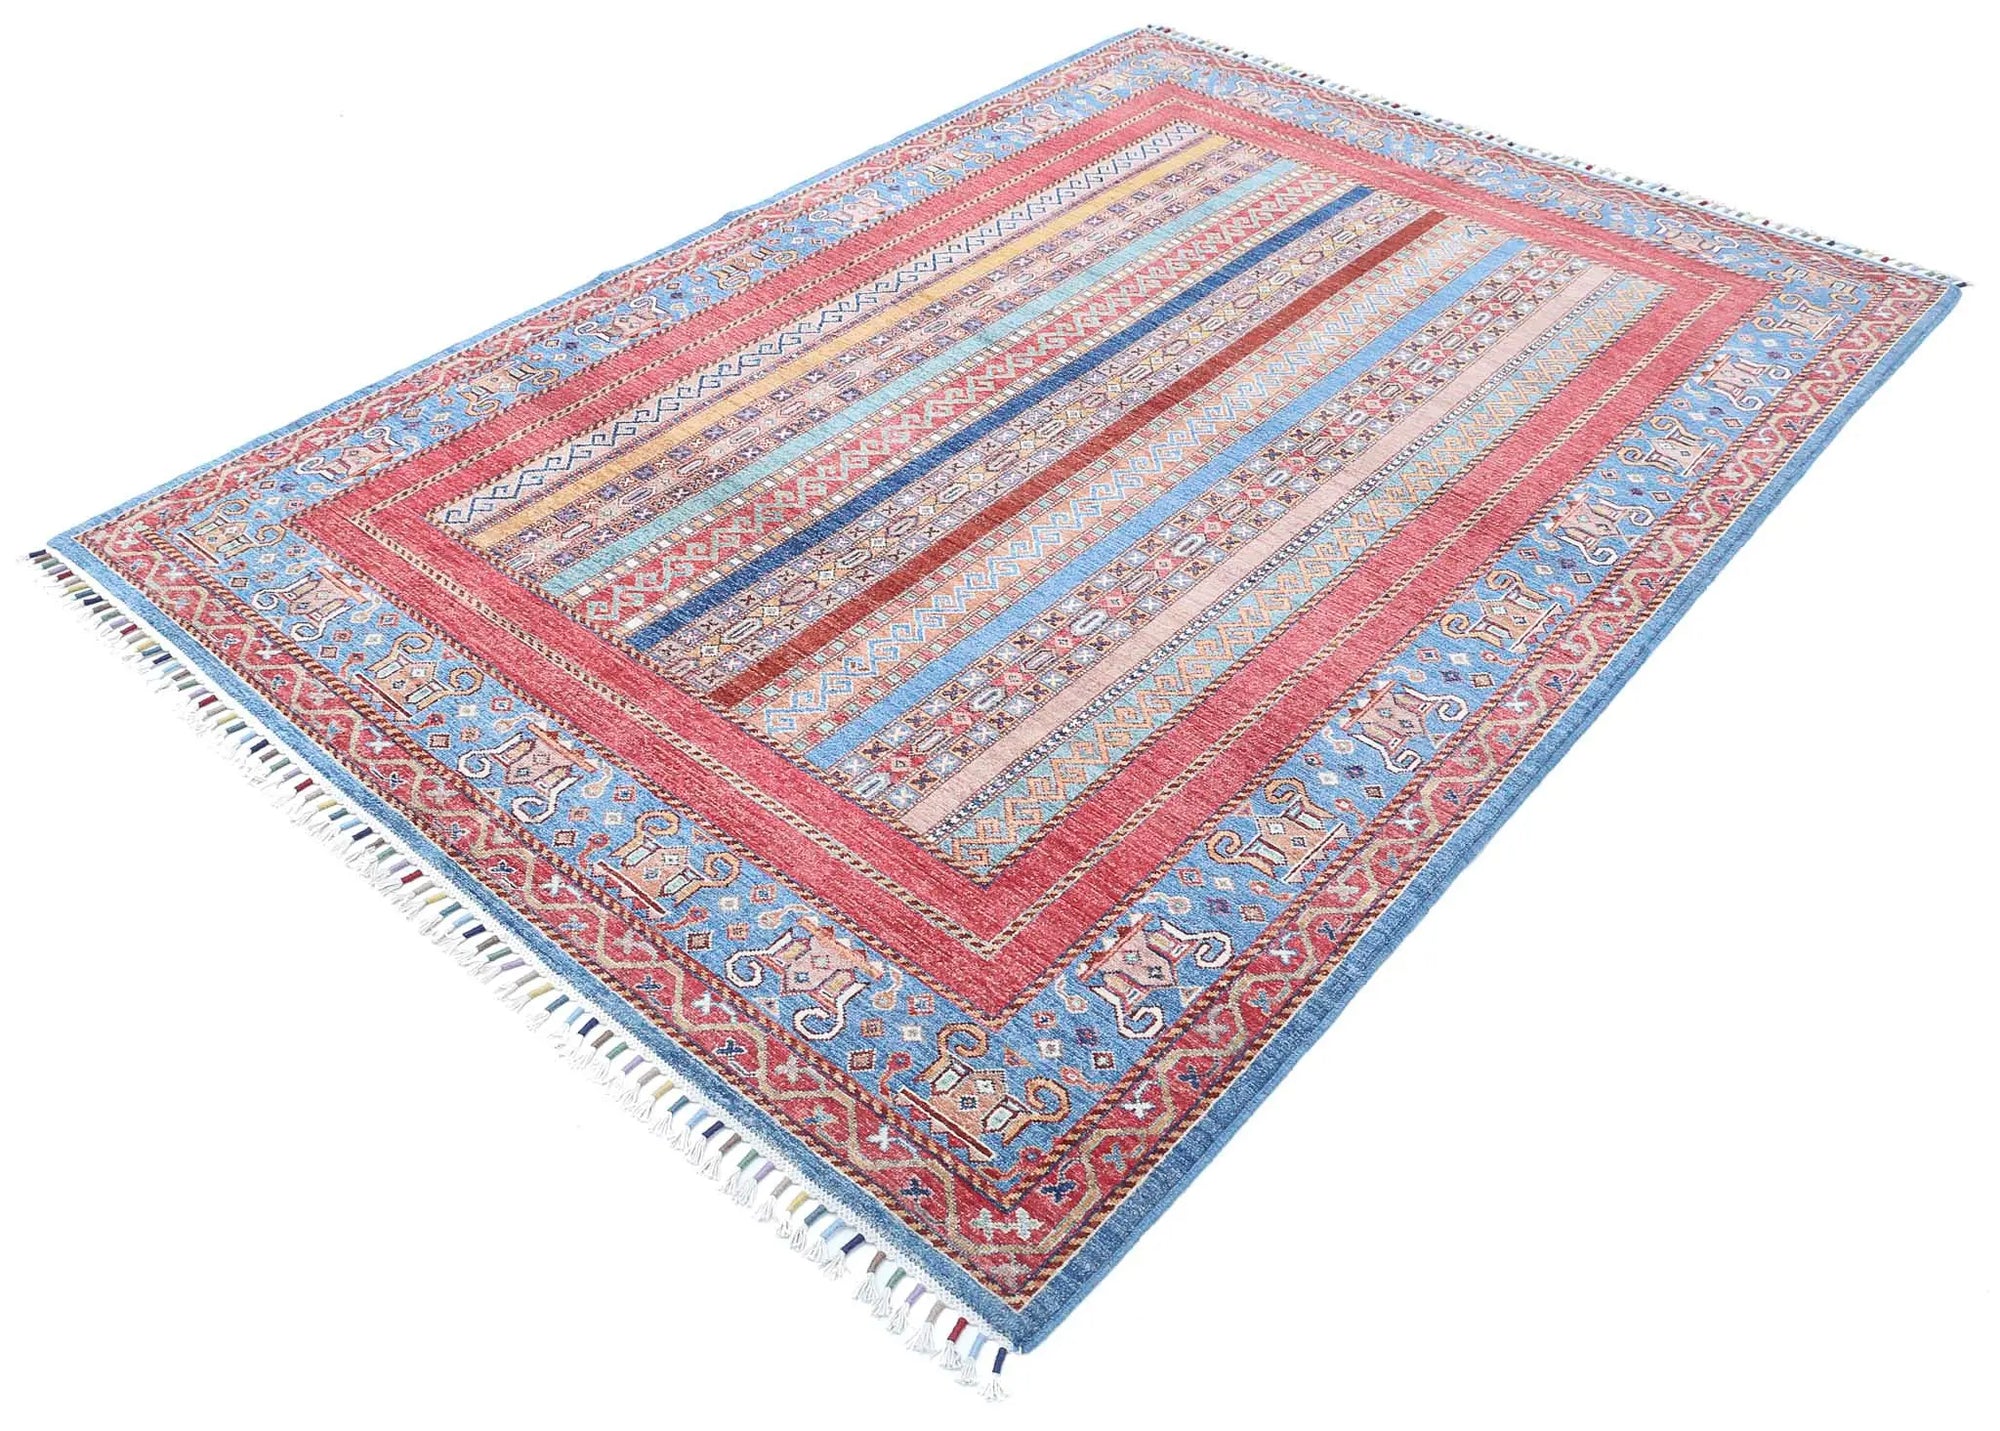 Hand Knotted Shaal Wool Rug - 5'8'' x 7'11''